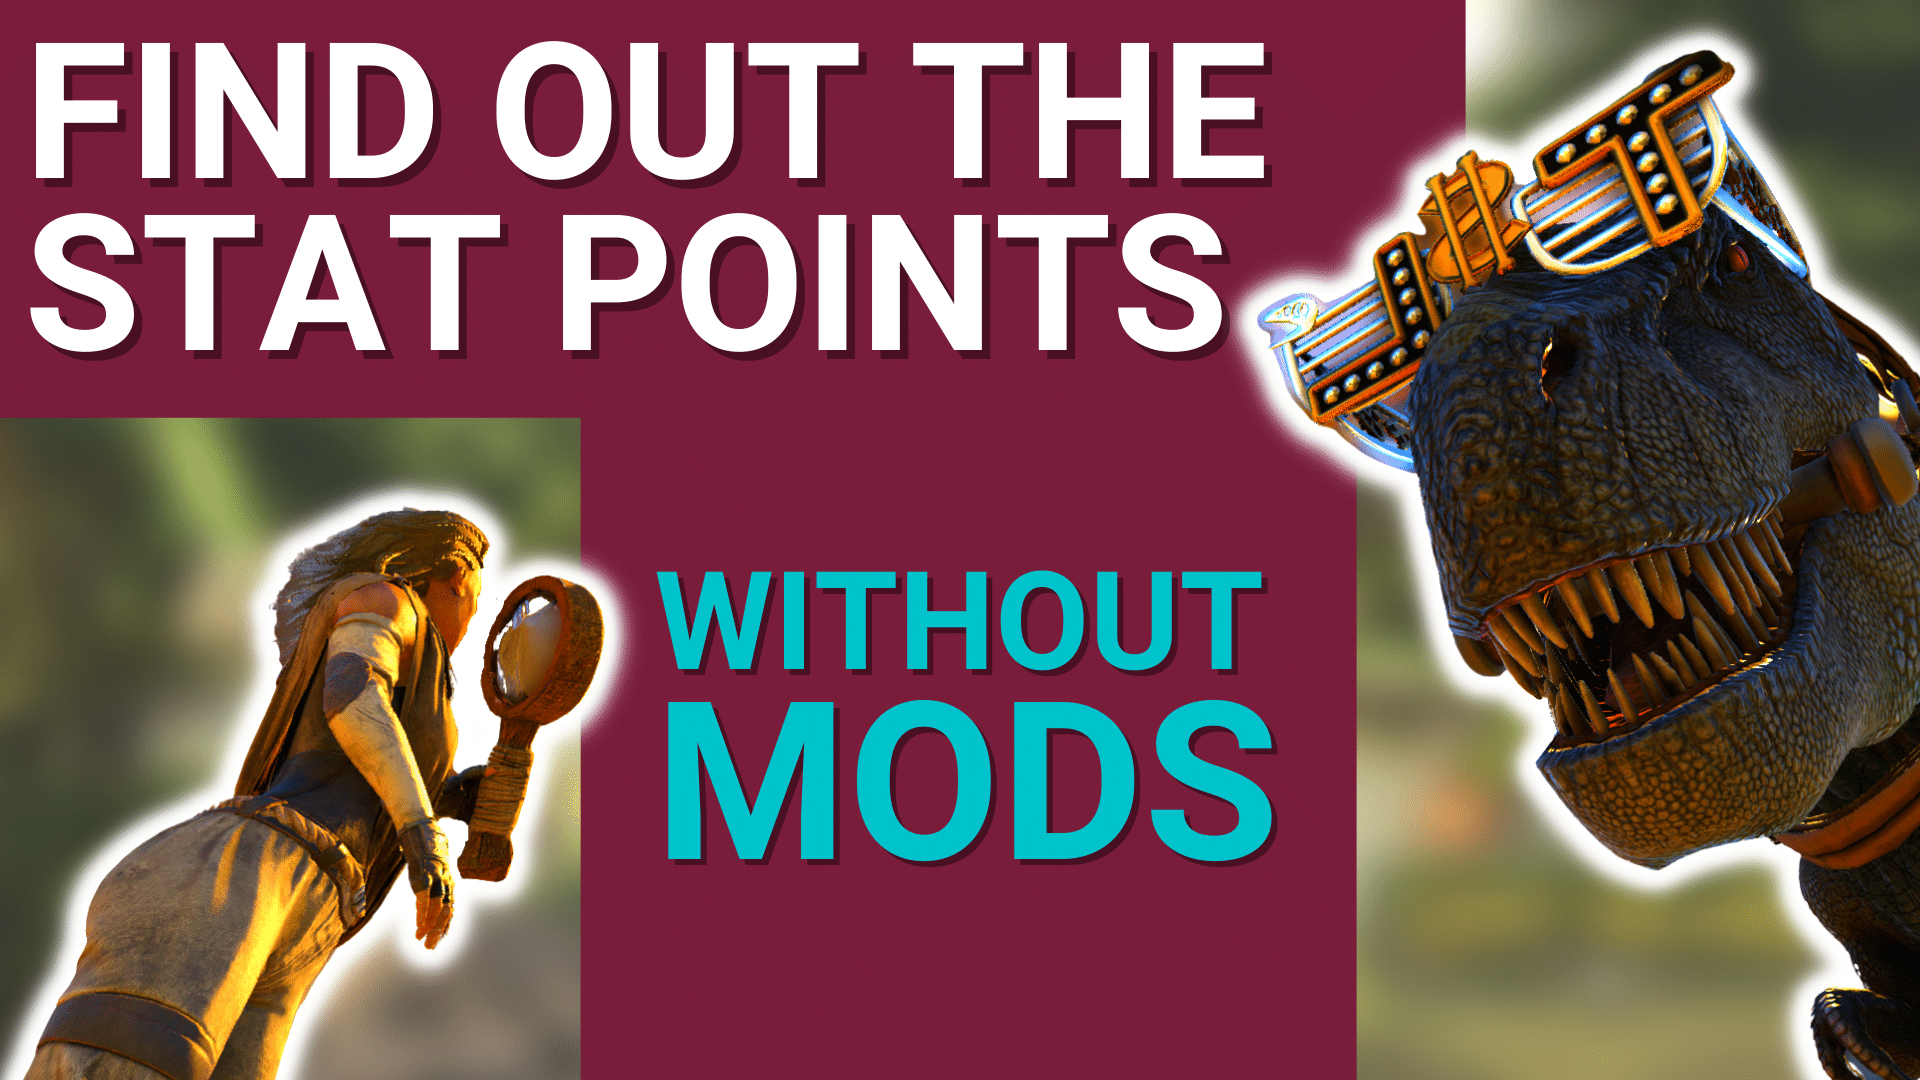 find out the statpoints without mods